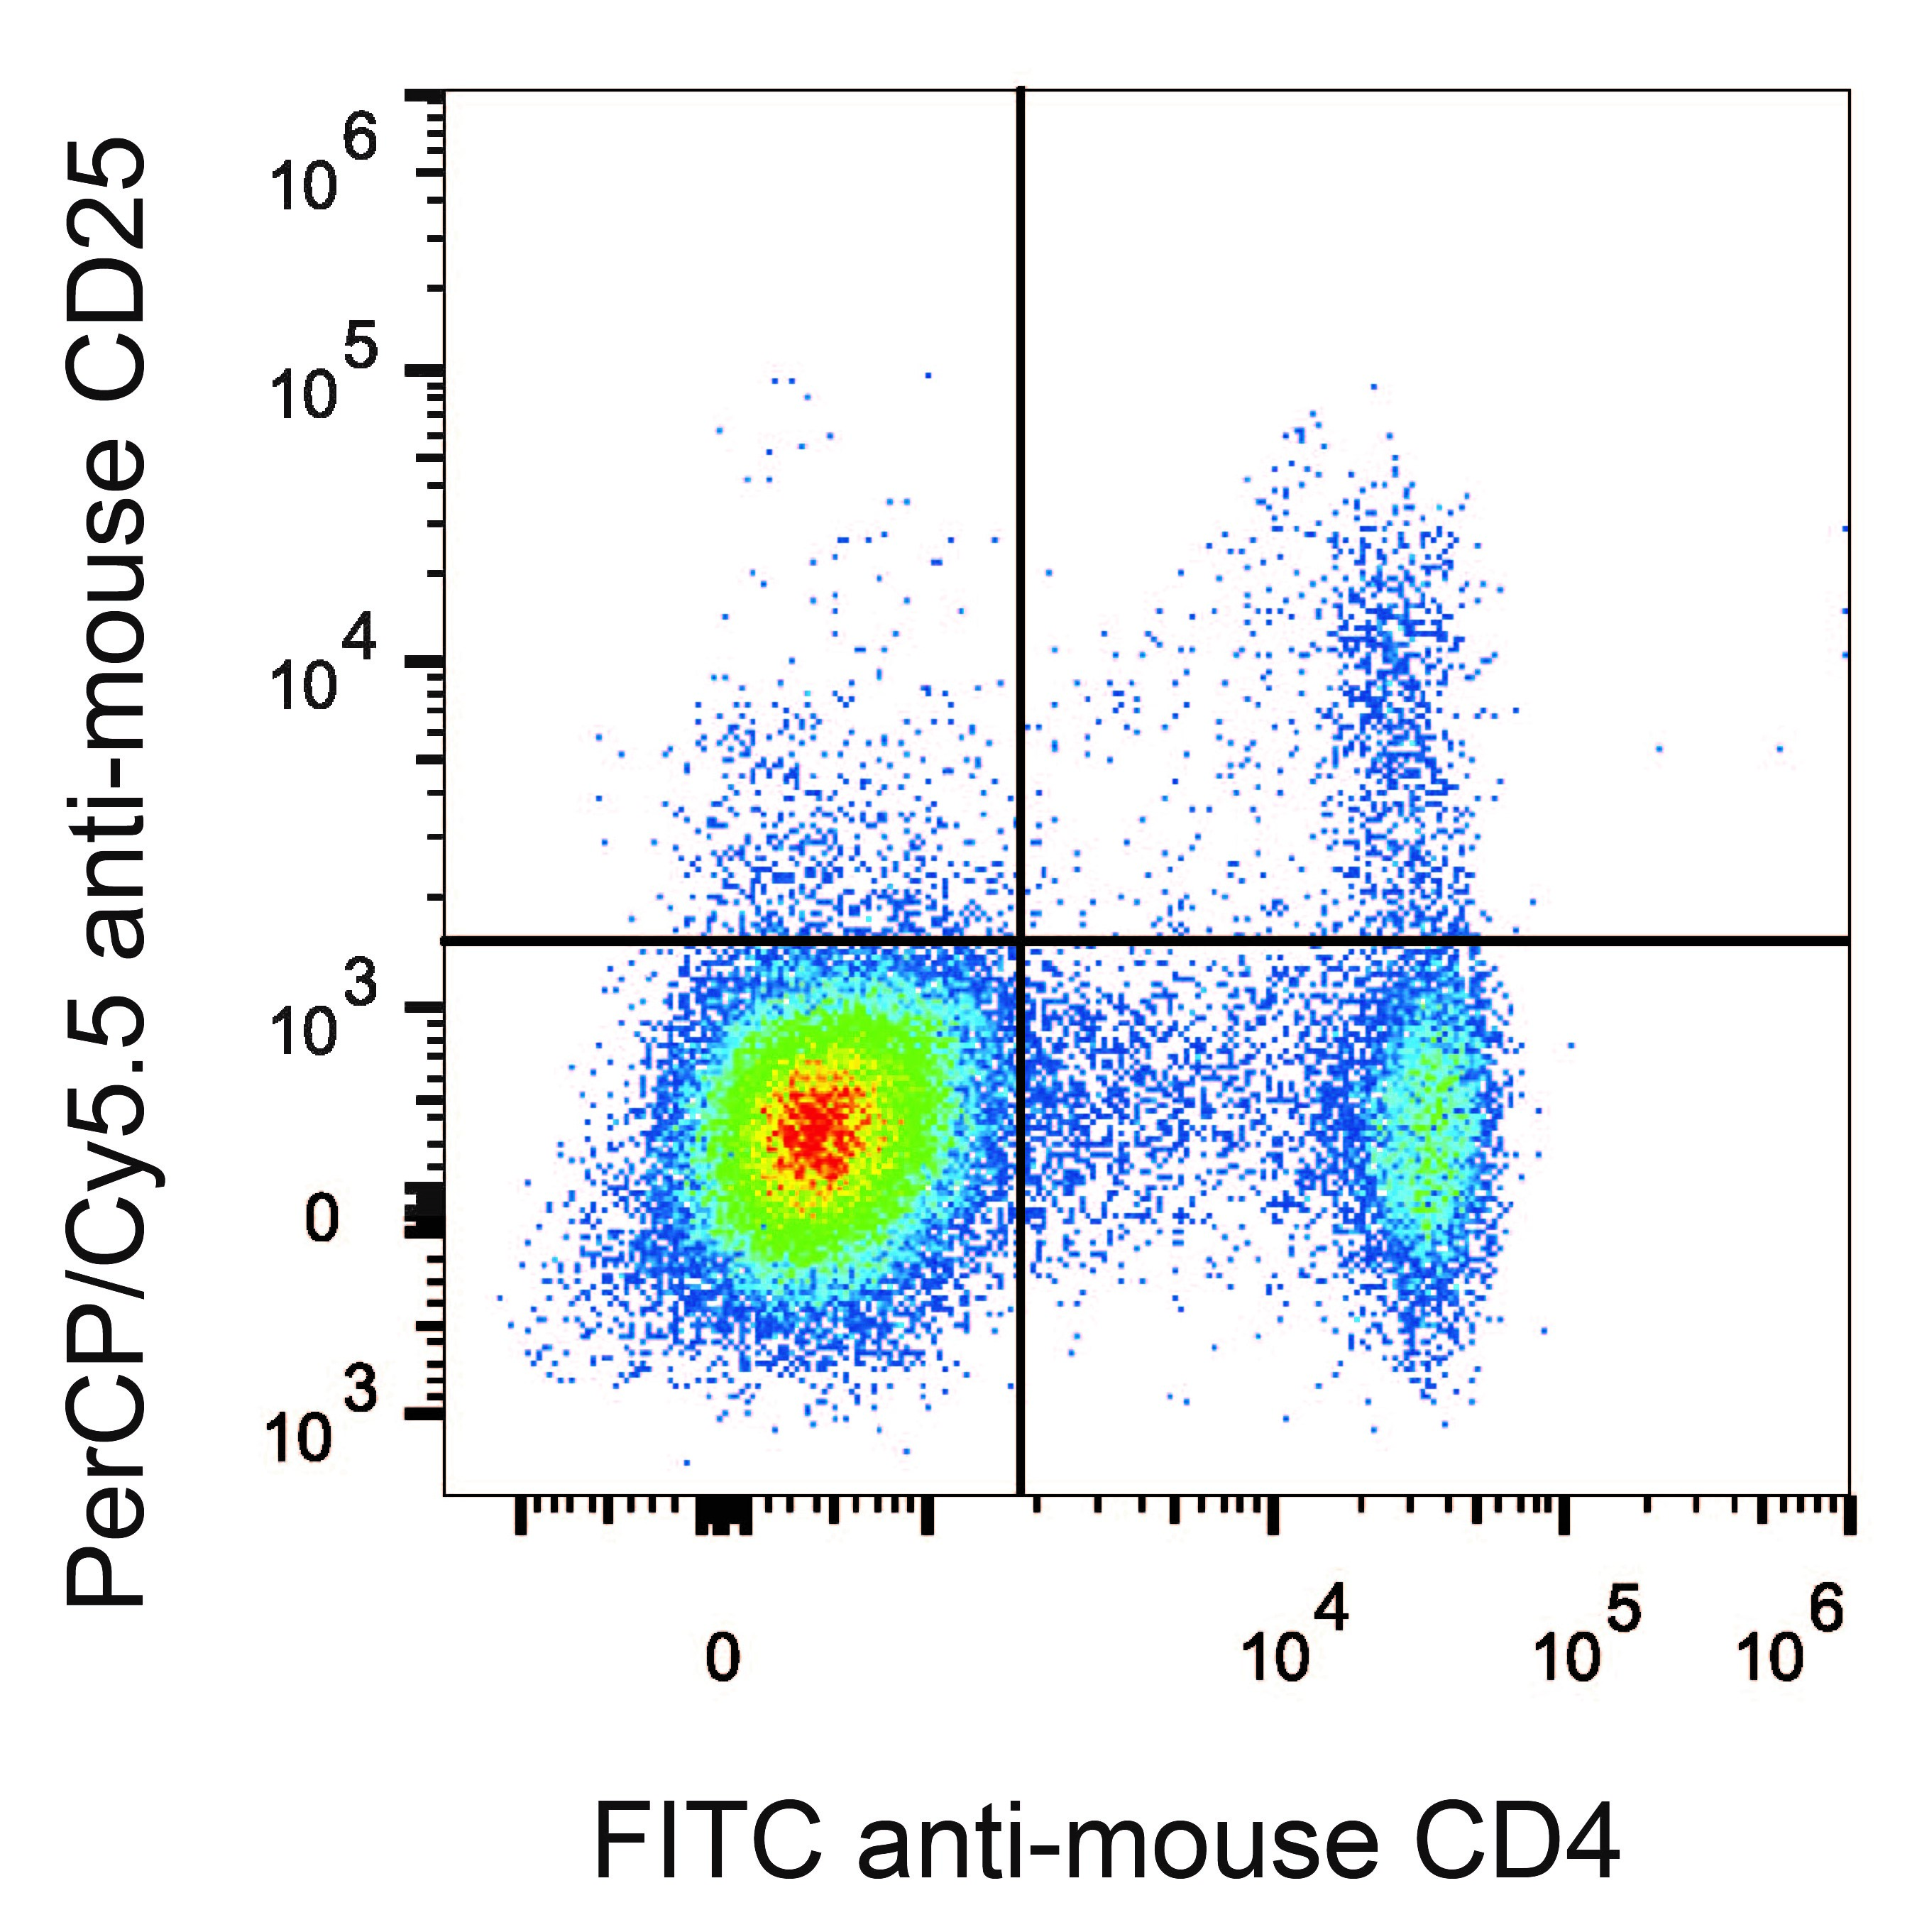 C57BL/6 murine splenocytes are stained with Anti-Mouse CD25 Monoclonal Antibody(PerCP/Cyanine5.5 Conjugated)[Used at 0.2 μg/10<sup>6</sup> cells dilution]and Anti-Mouse CD4 Monoclonal Antibody(FITC Conjugated).